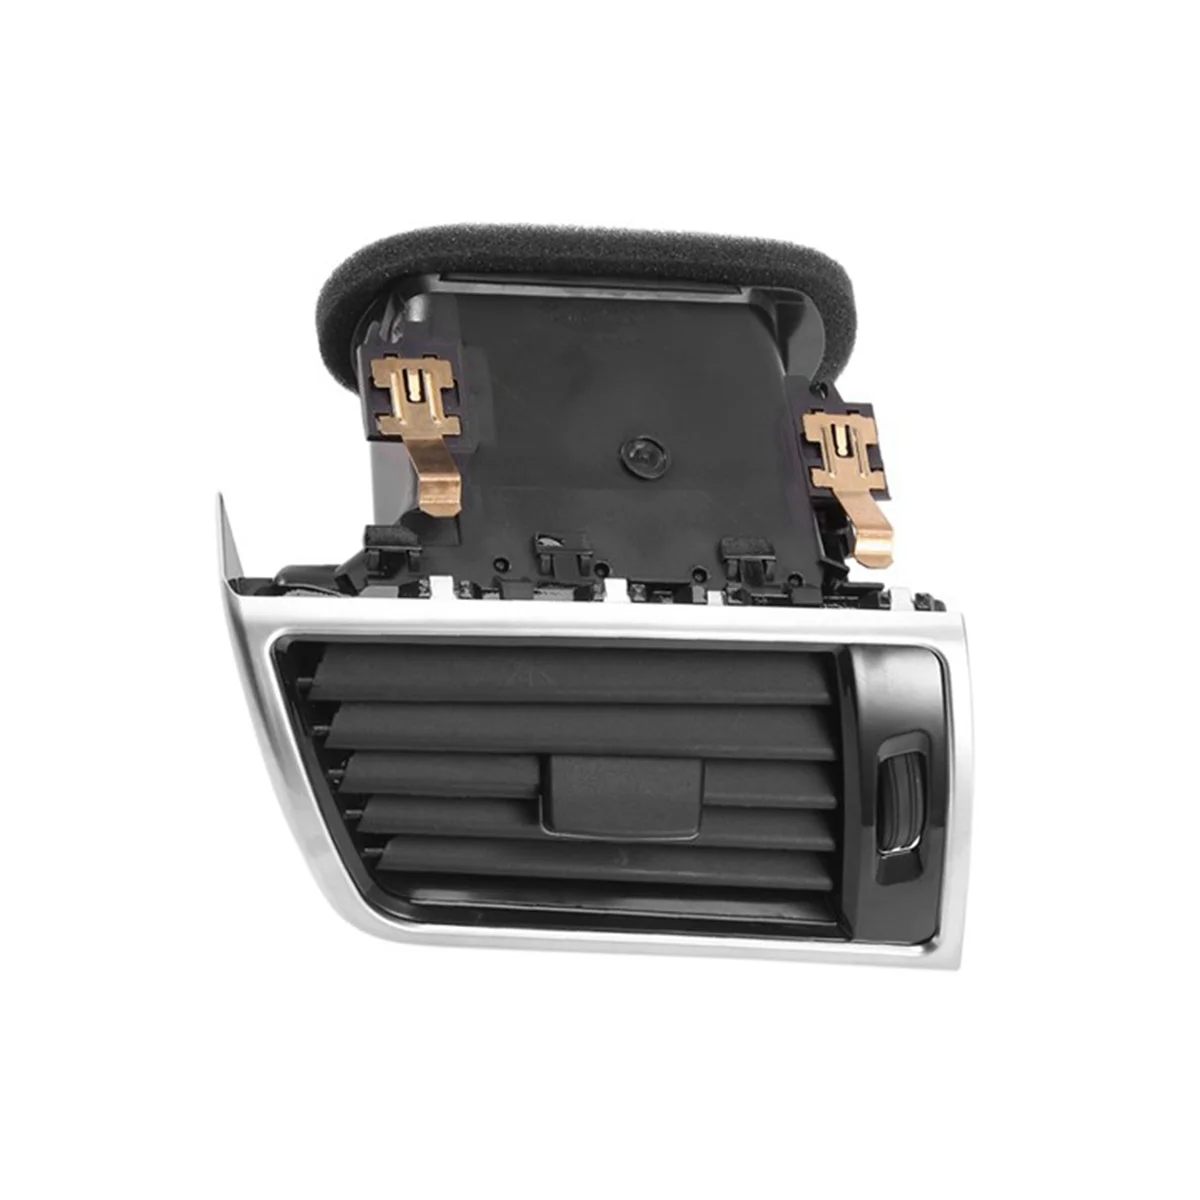 

Car Dashboard Central Conditioner Air Vent Grille Complete Assembly for Mercedes Benz GLE GLS Class W166 W292 2015-2019